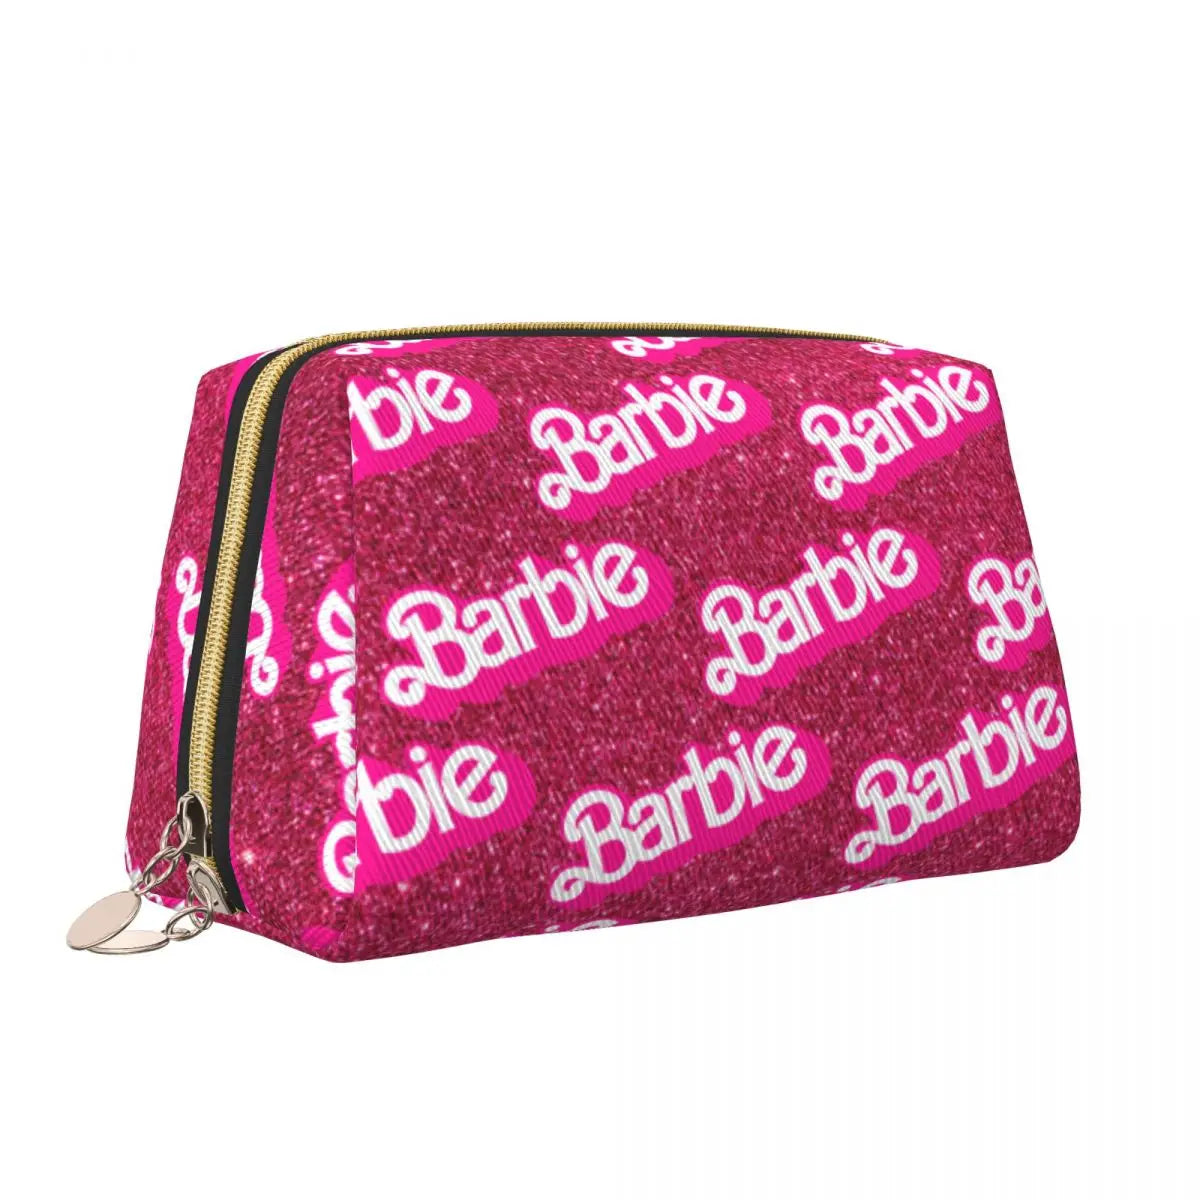 Stylish Pink Barbie Makeup Bag - Large Capacity Cosmetic Bag with Zipper, Perfect for Girls' Beauty Accessories and Toiletries